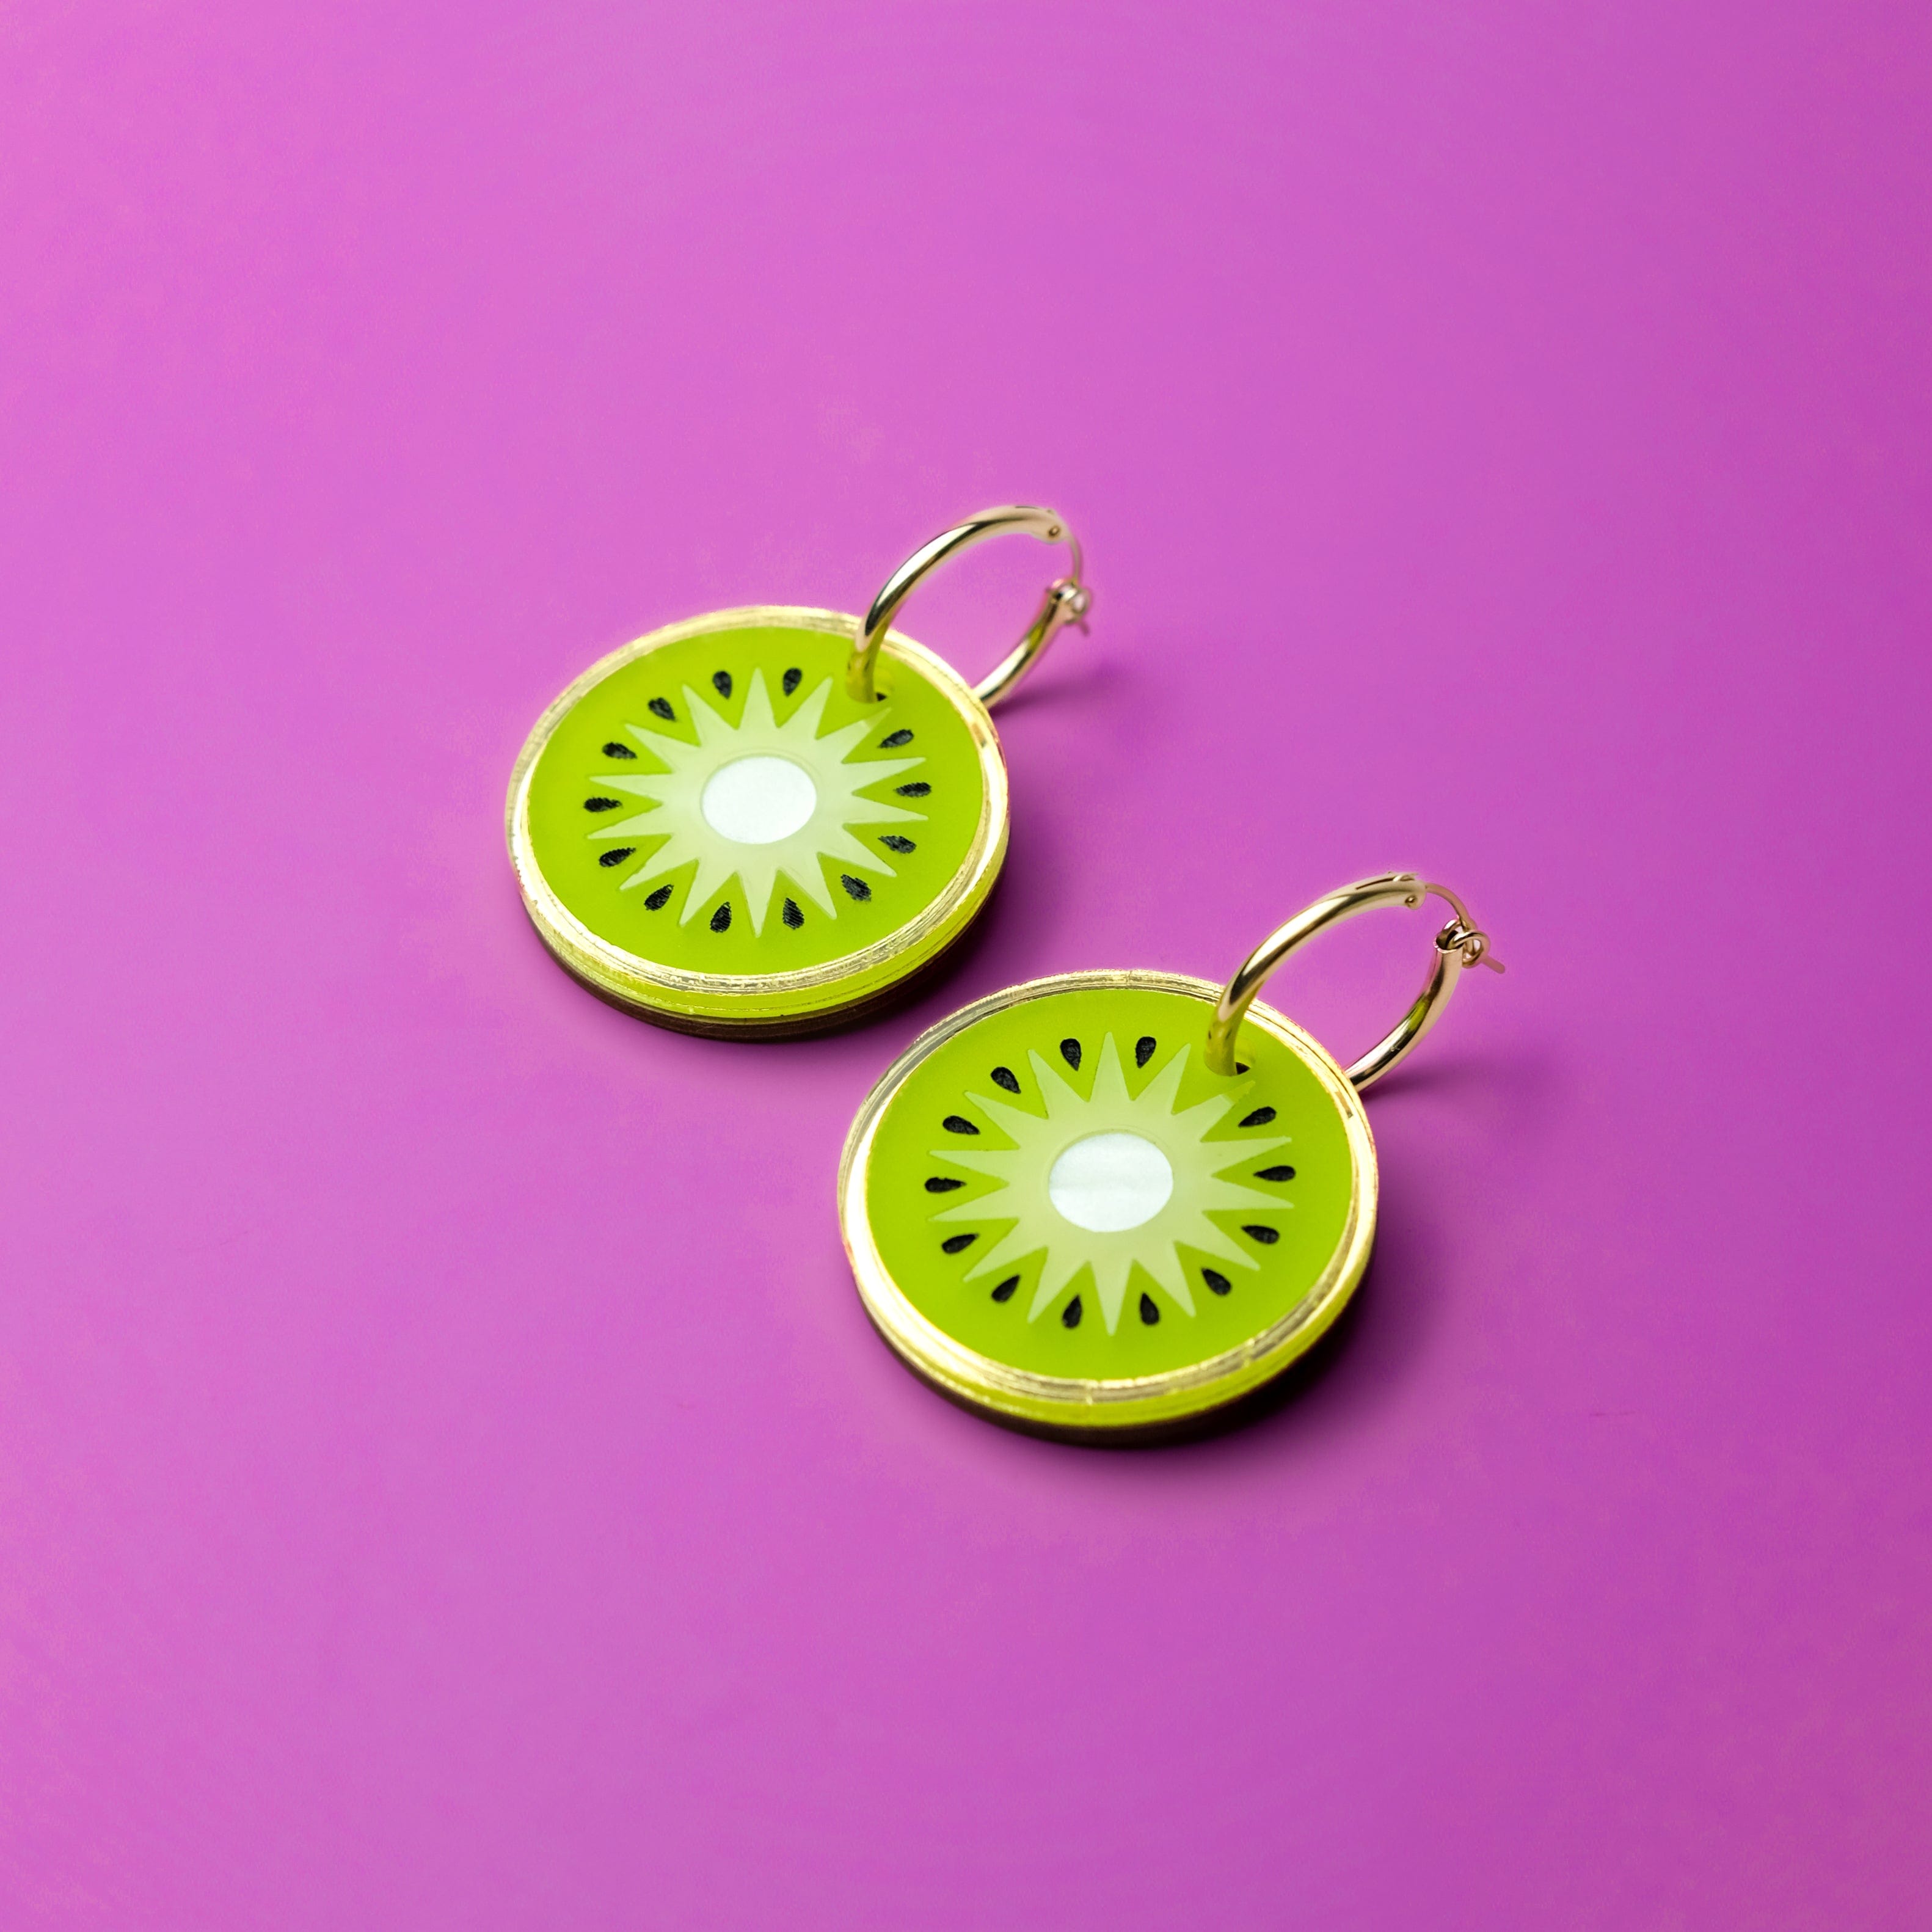 Kiwi earrings with gold-filled hoops 